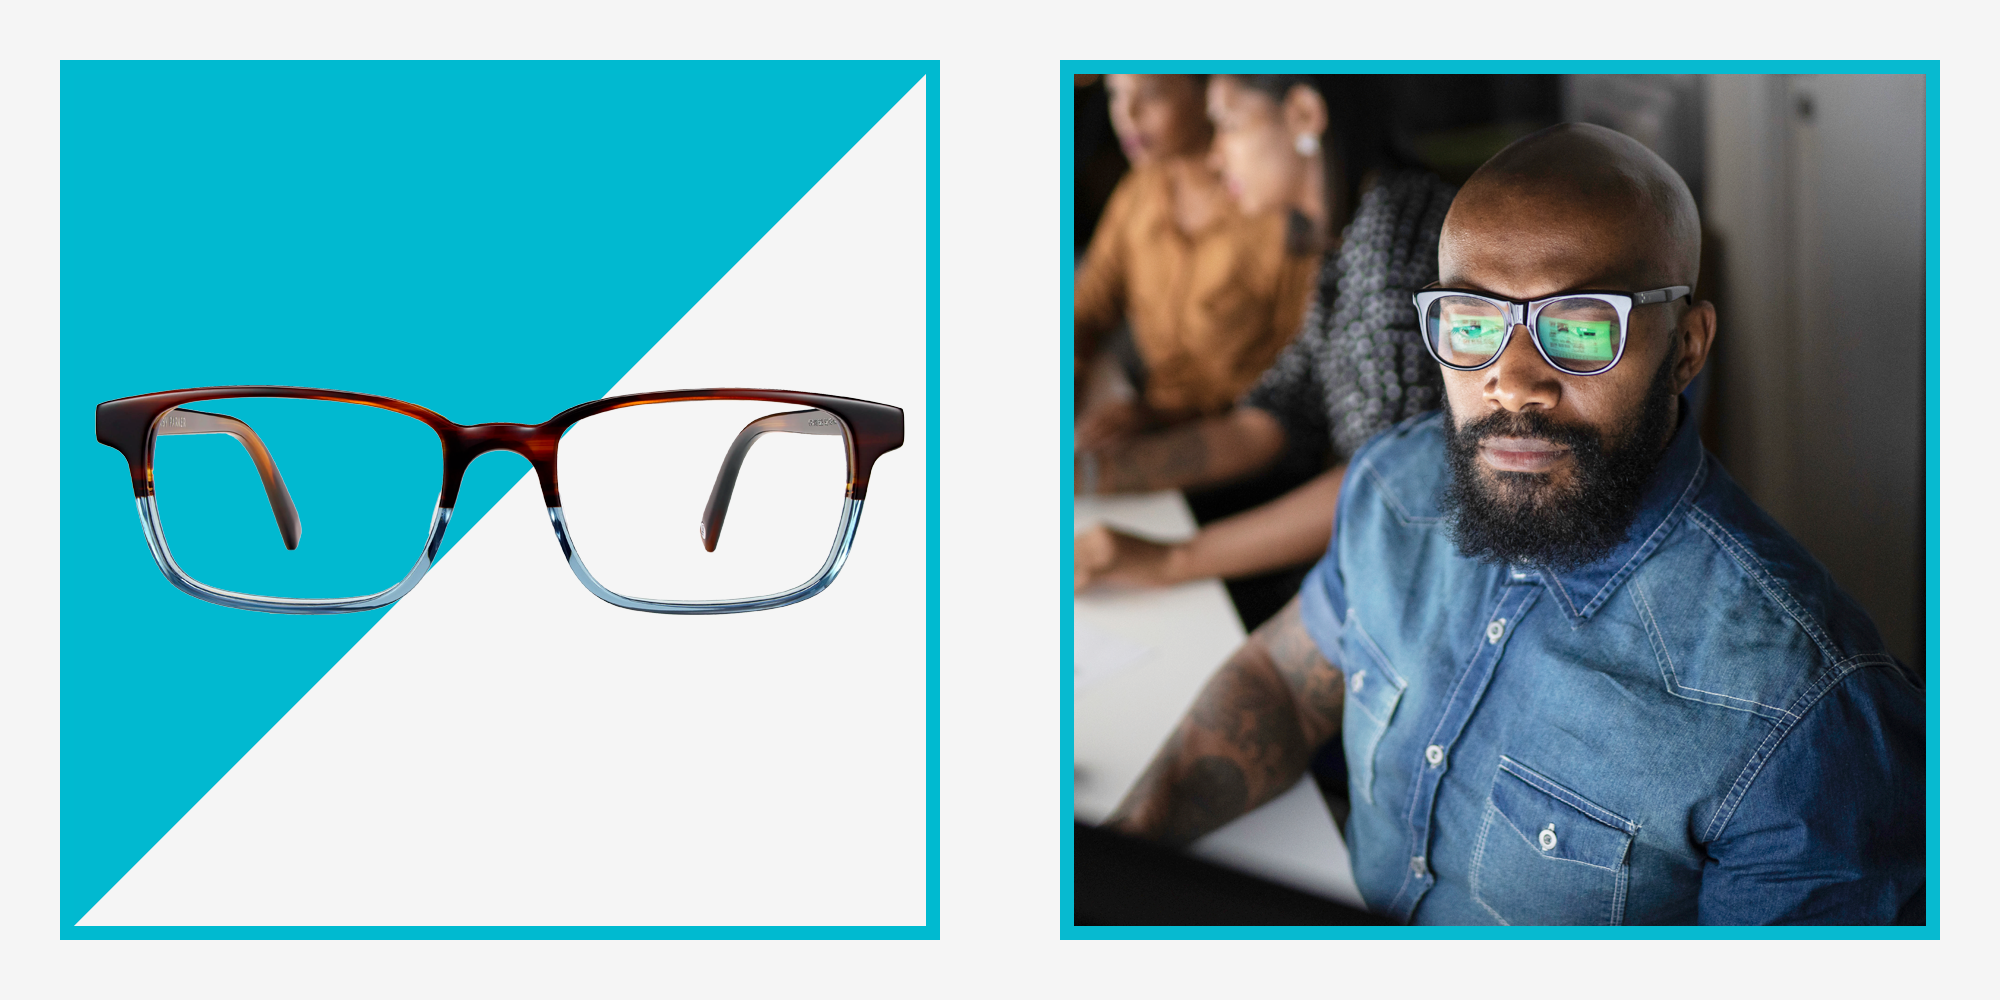 Do Blue Light Glasses Work? How to Protect Your Eyes, According to Experts  - The New York Times